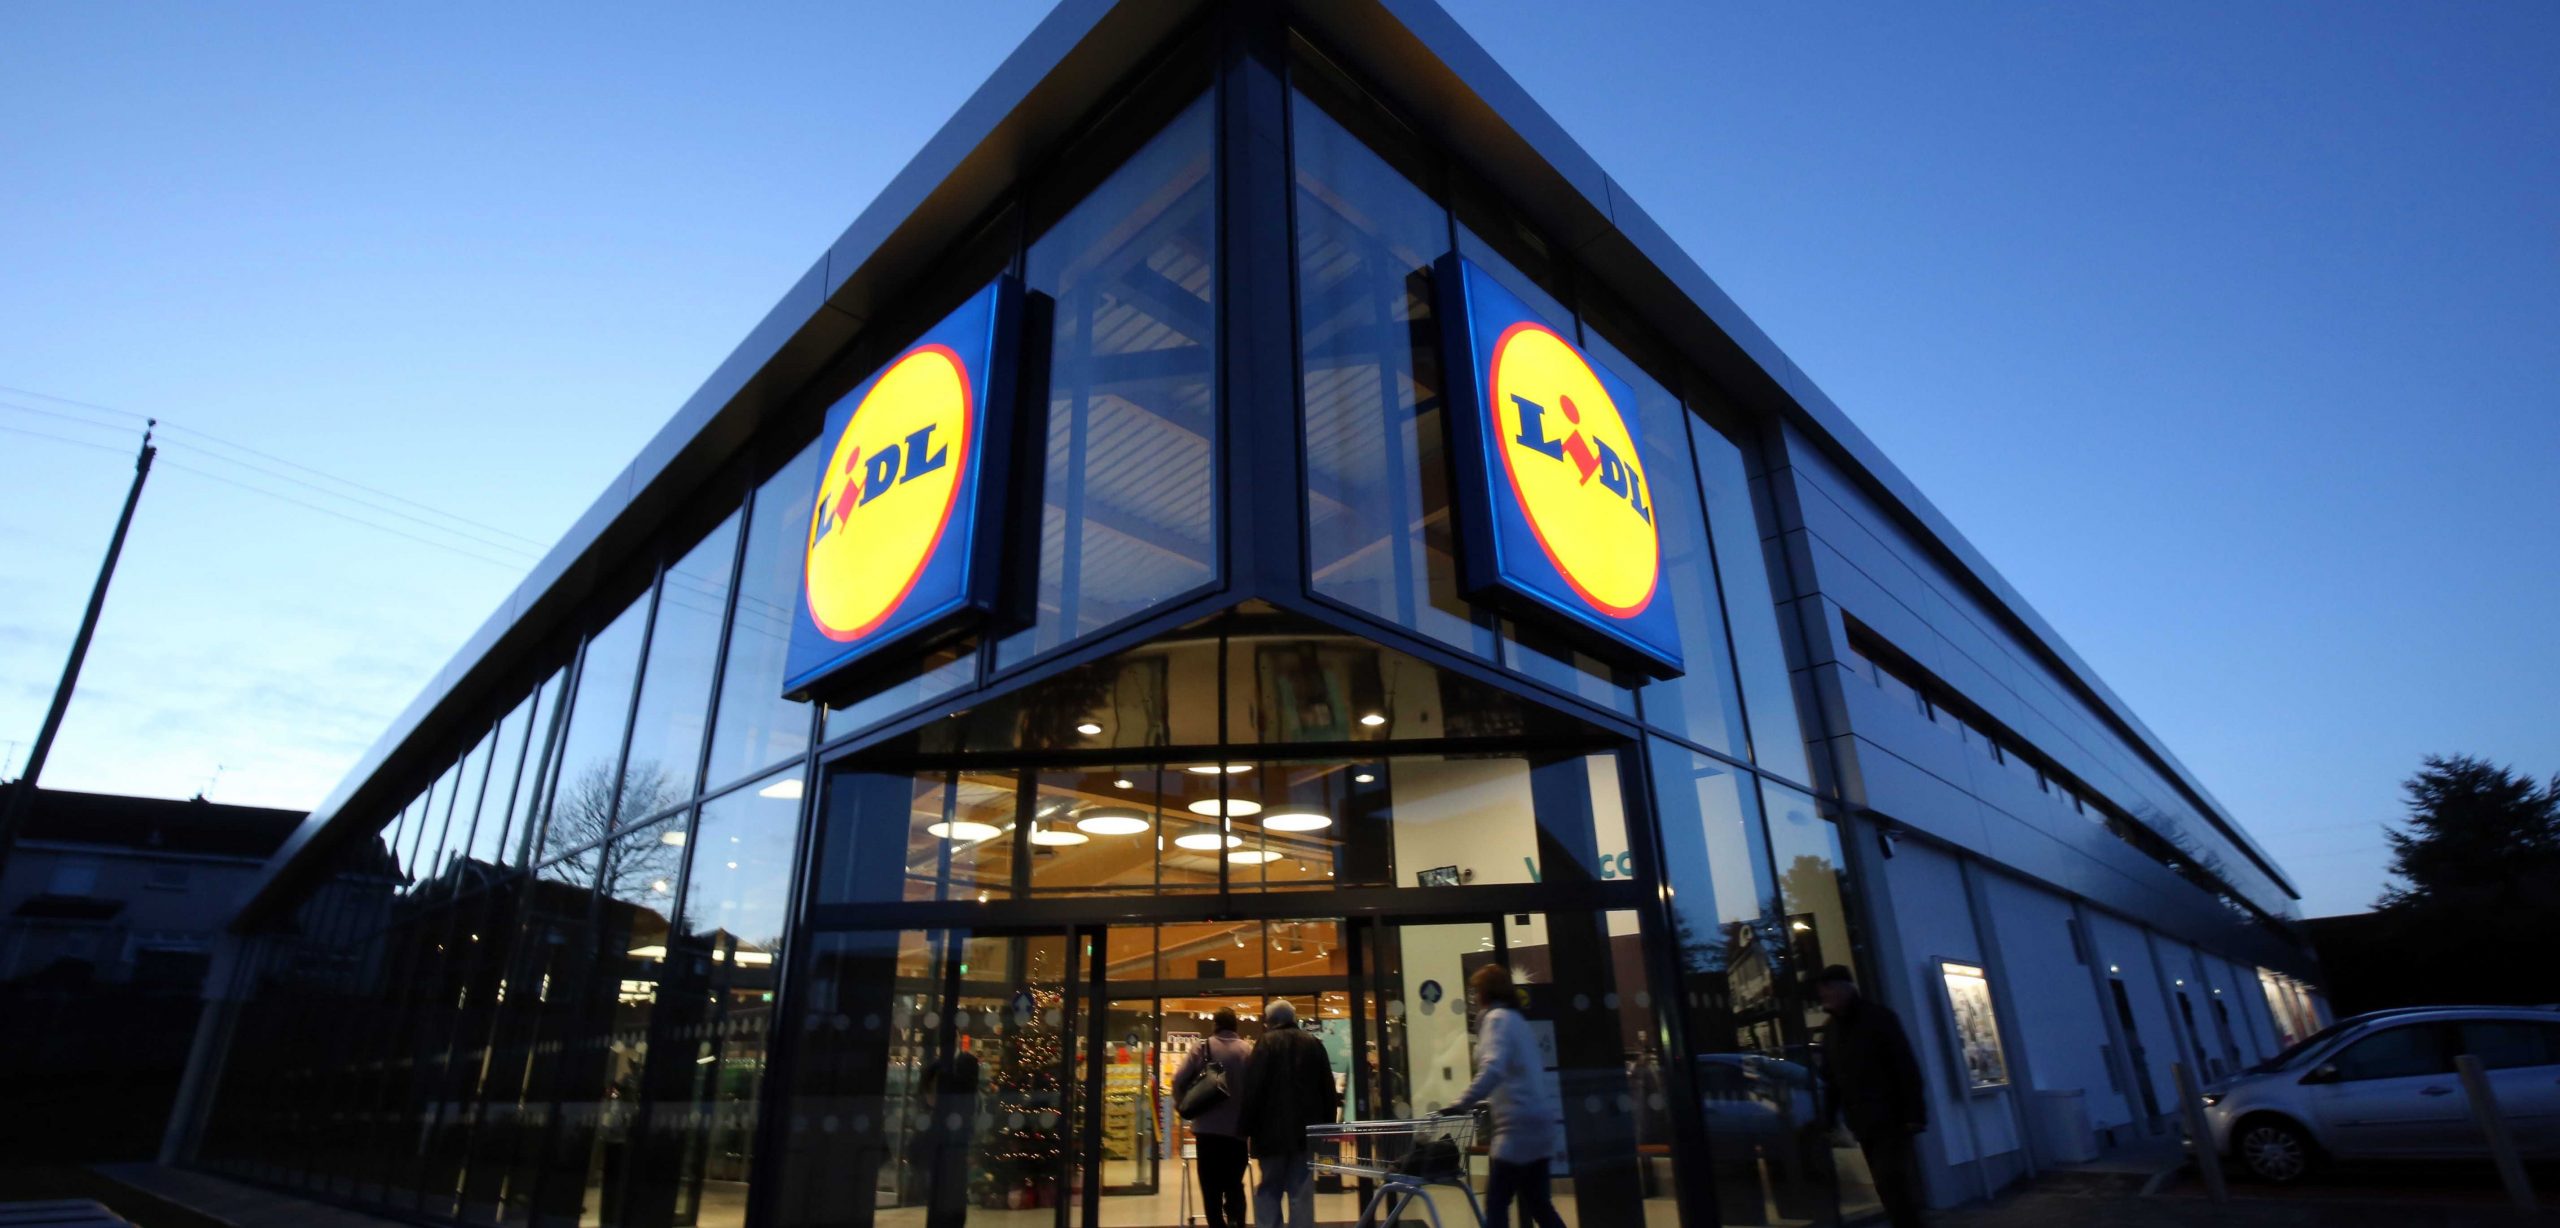 Lidl Ireland expansion plans – 1,200 new jobs coming